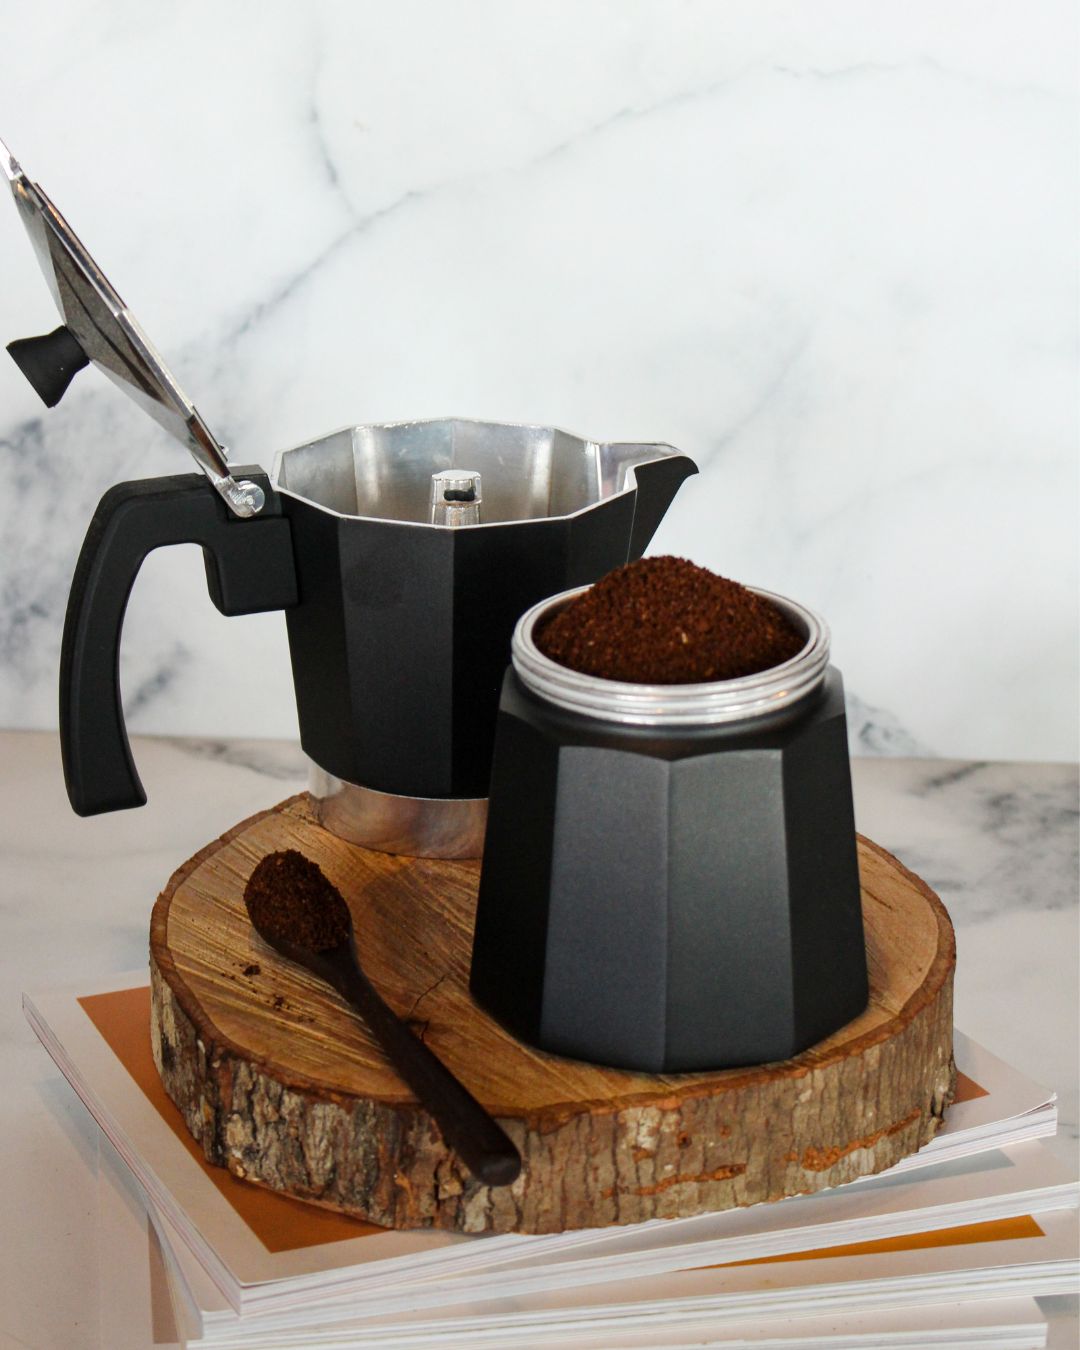 A moka pot sits open, with coffee grounds added to the chamber